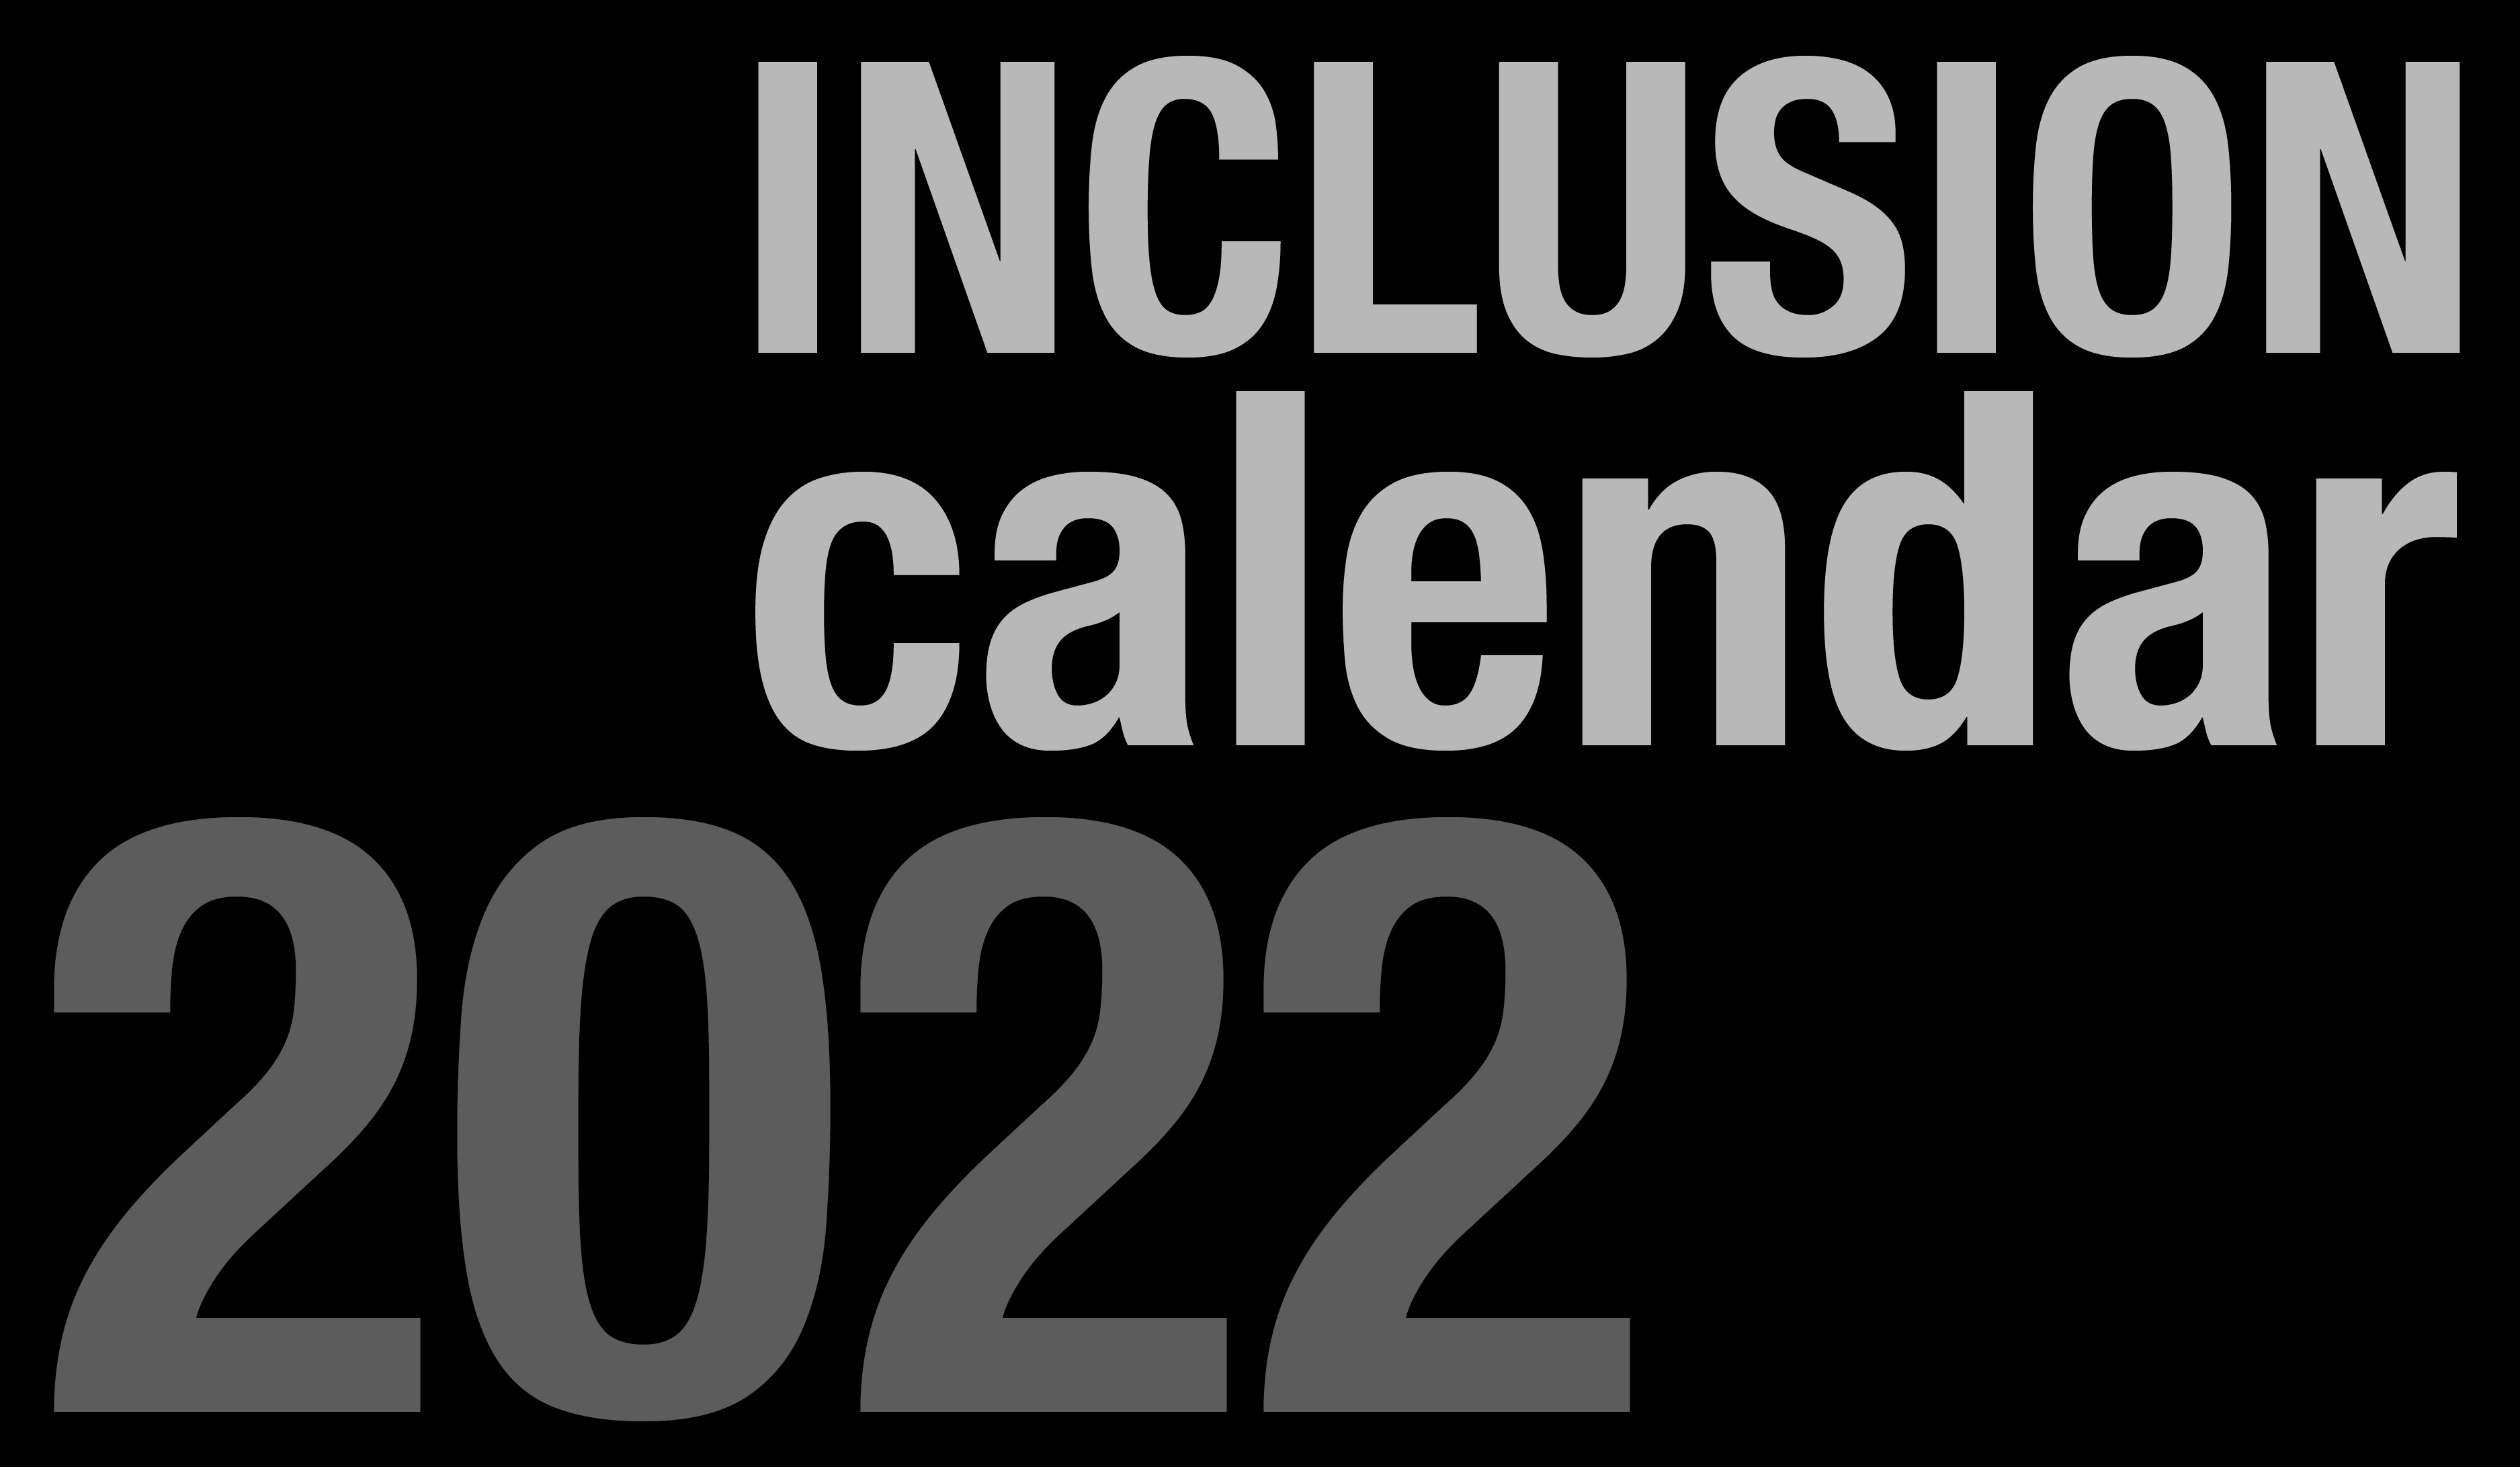 Inclusion calendar 2022 text only